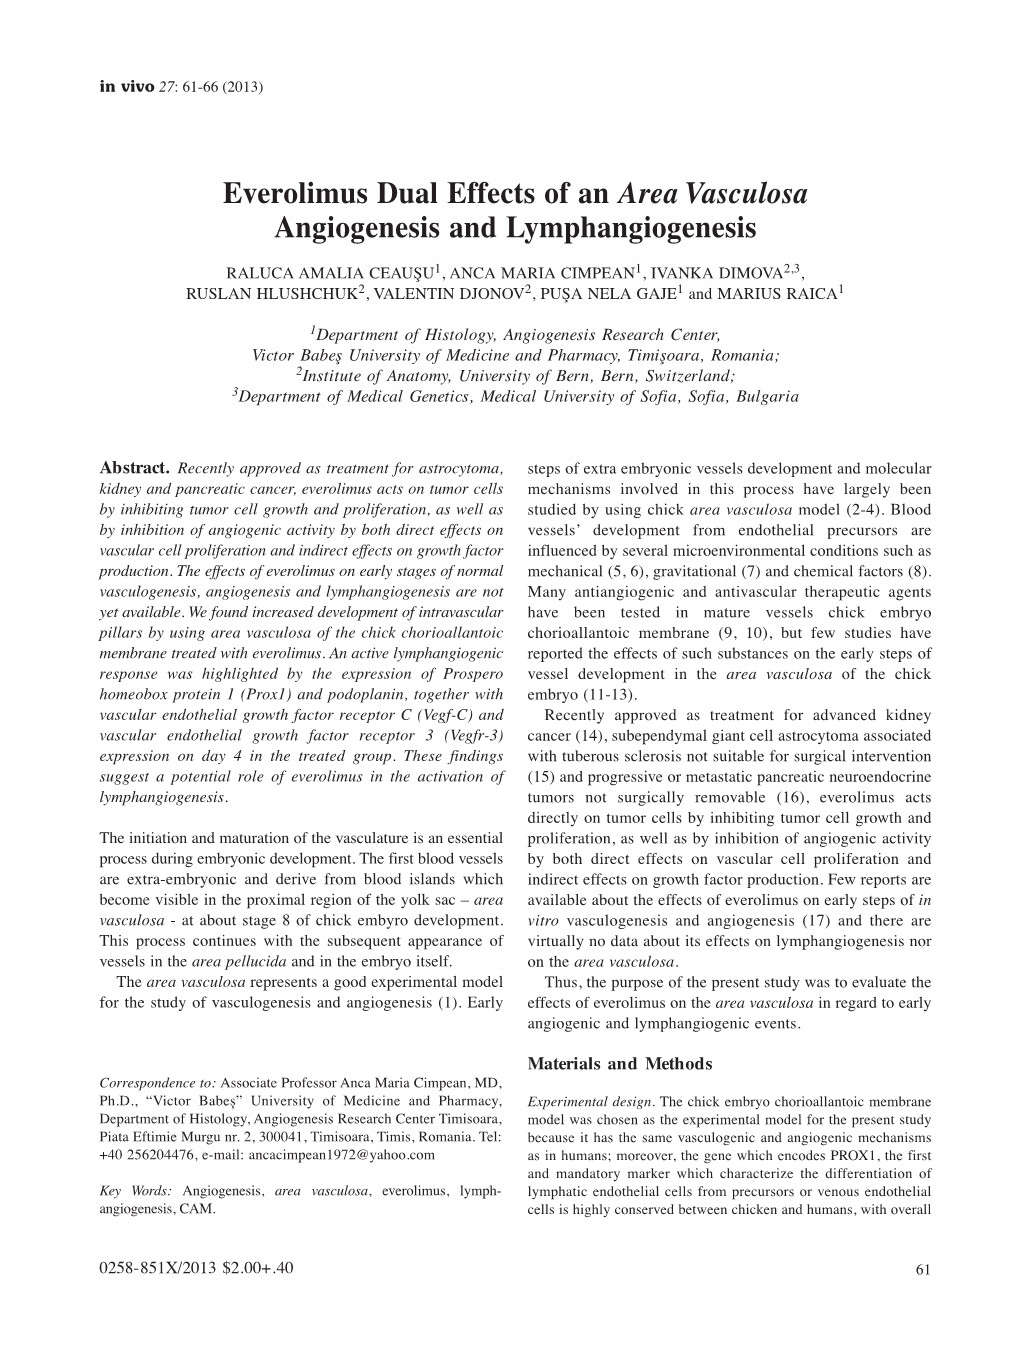 Everolimus Dual Effects of an Area Vasculosa Angiogenesis and Lymphangiogenesis